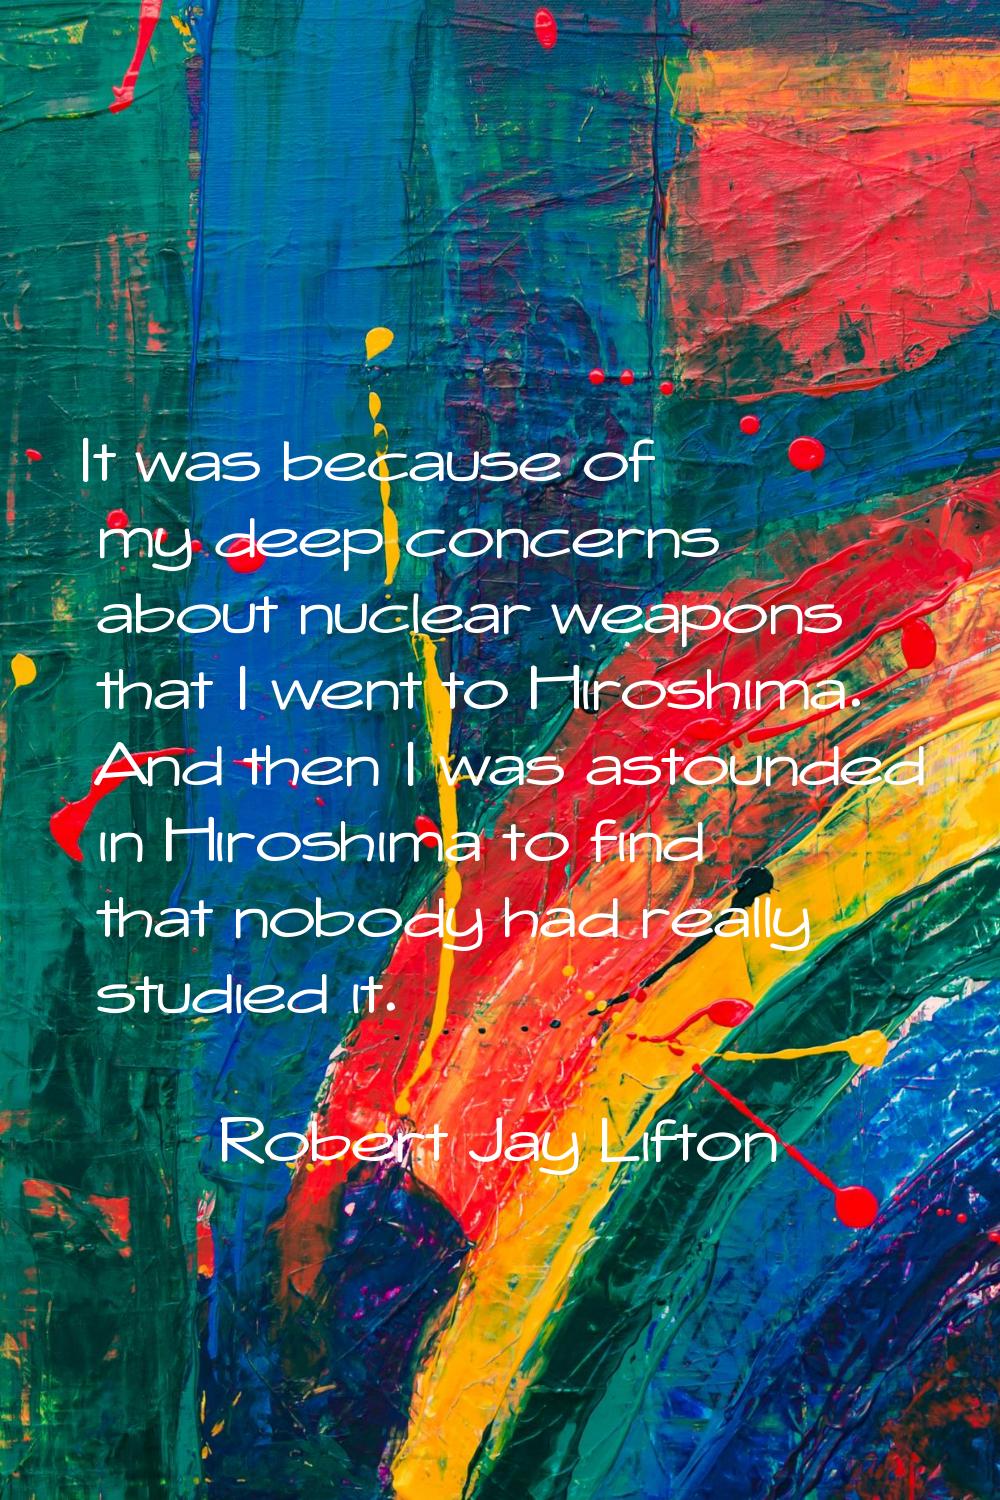 It was because of my deep concerns about nuclear weapons that I went to Hiroshima. And then I was a